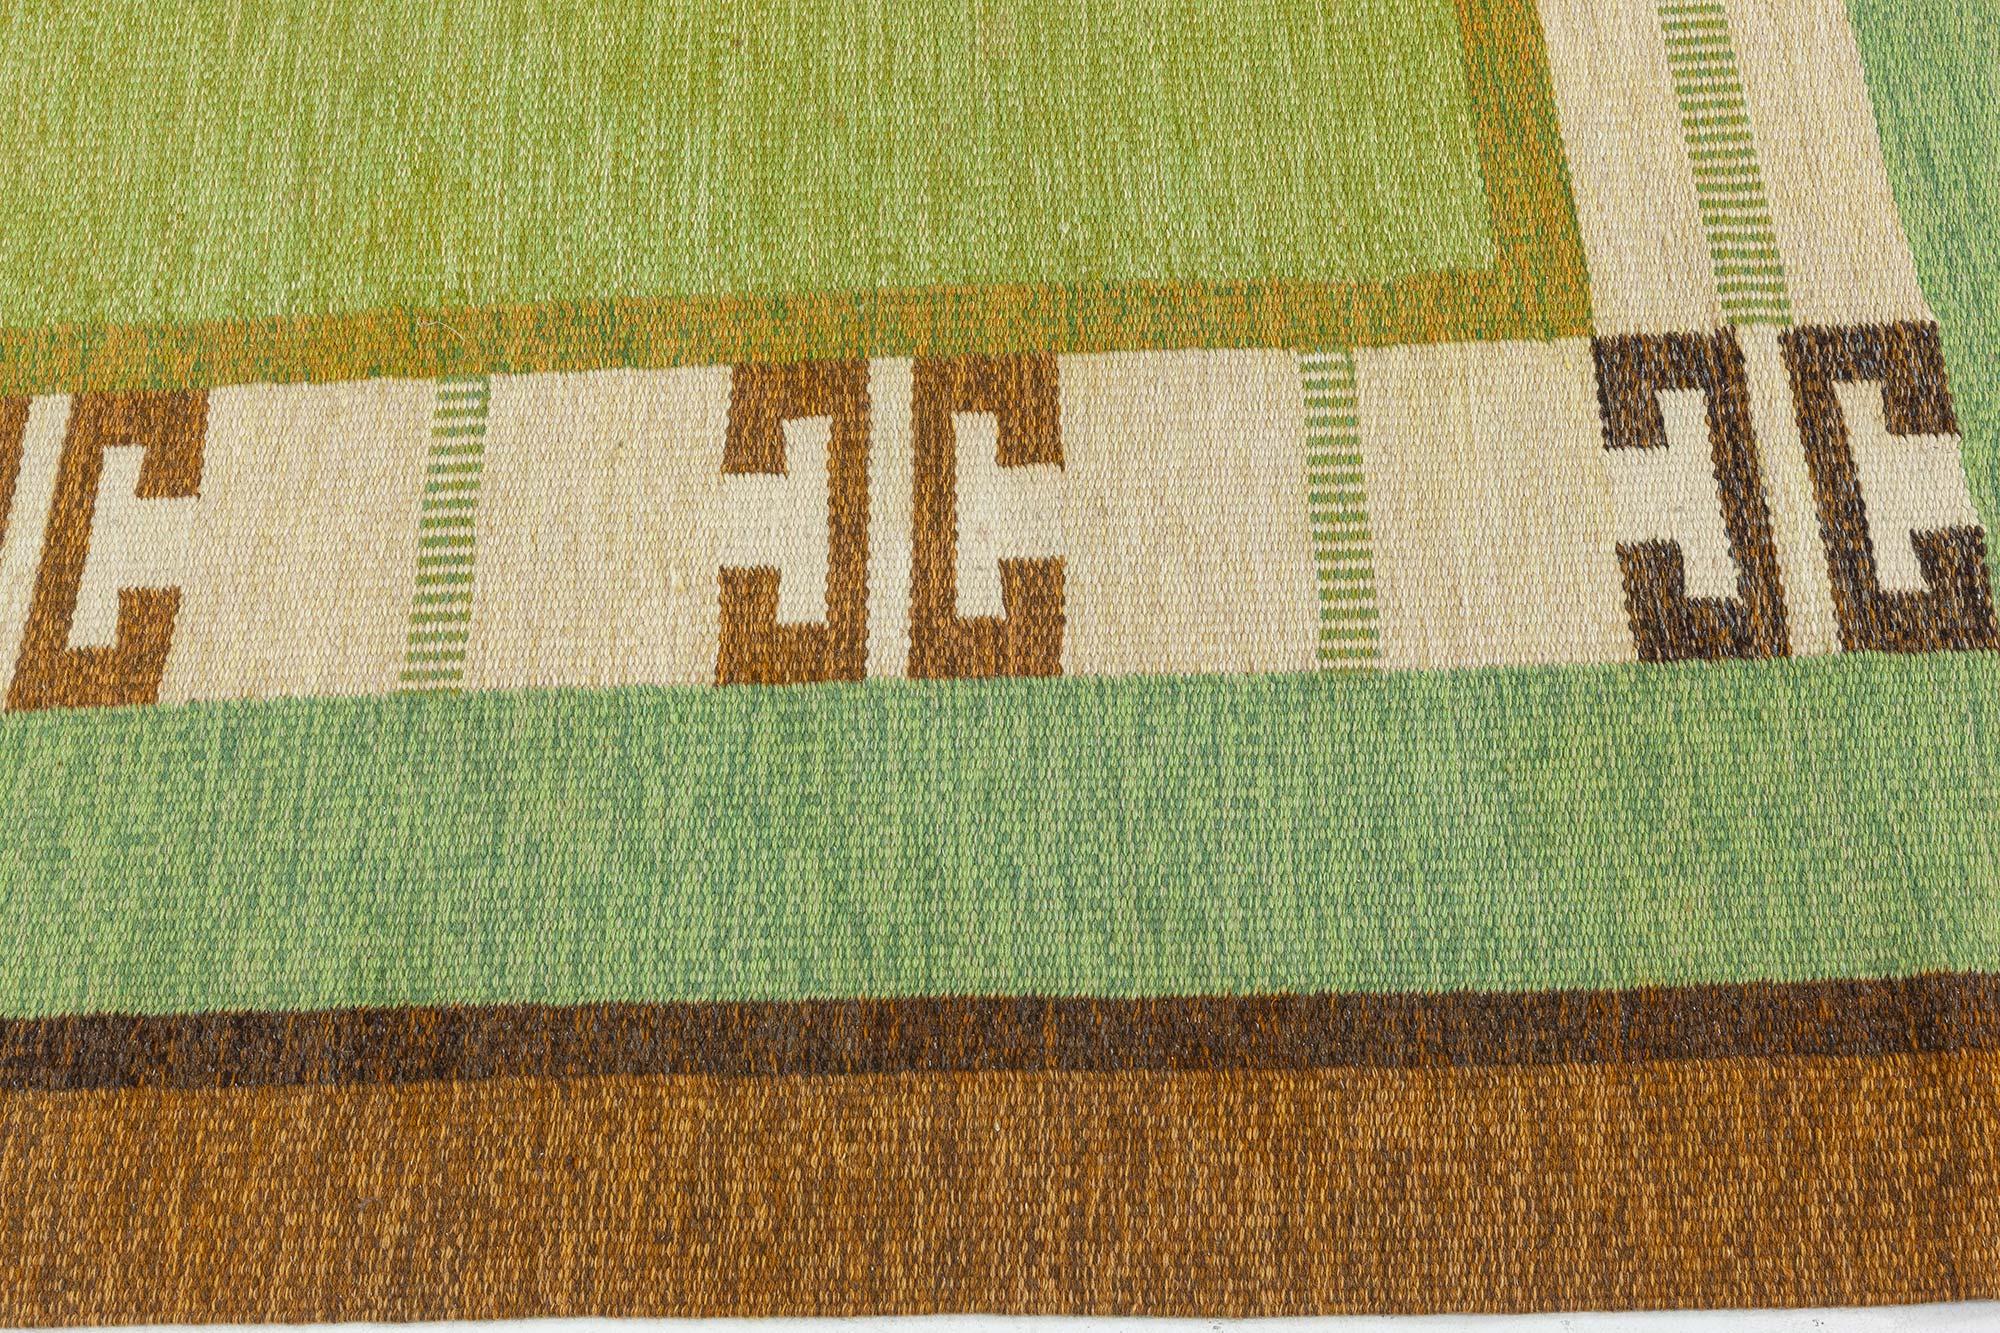 Hand-Woven Vintage Green Flat-weave Rug by Ingegerd Silow For Sale